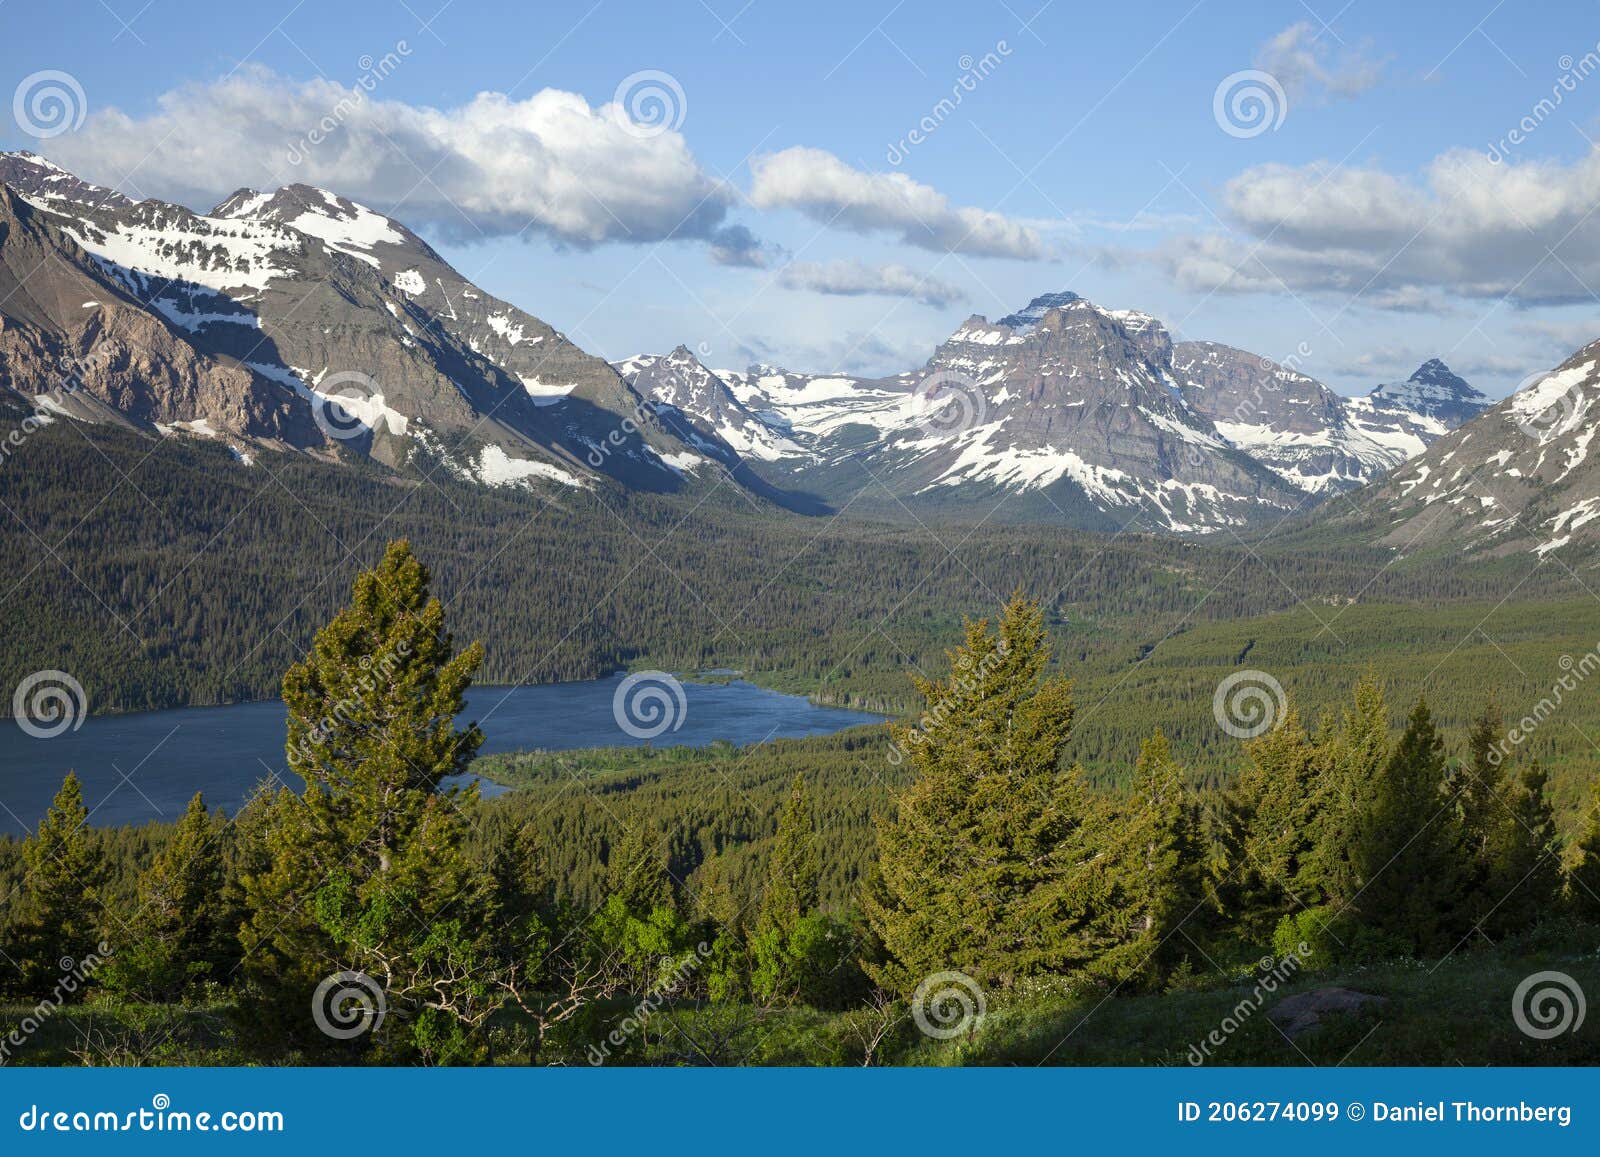 mountains above lower two medicine lake near glacier national park in montana